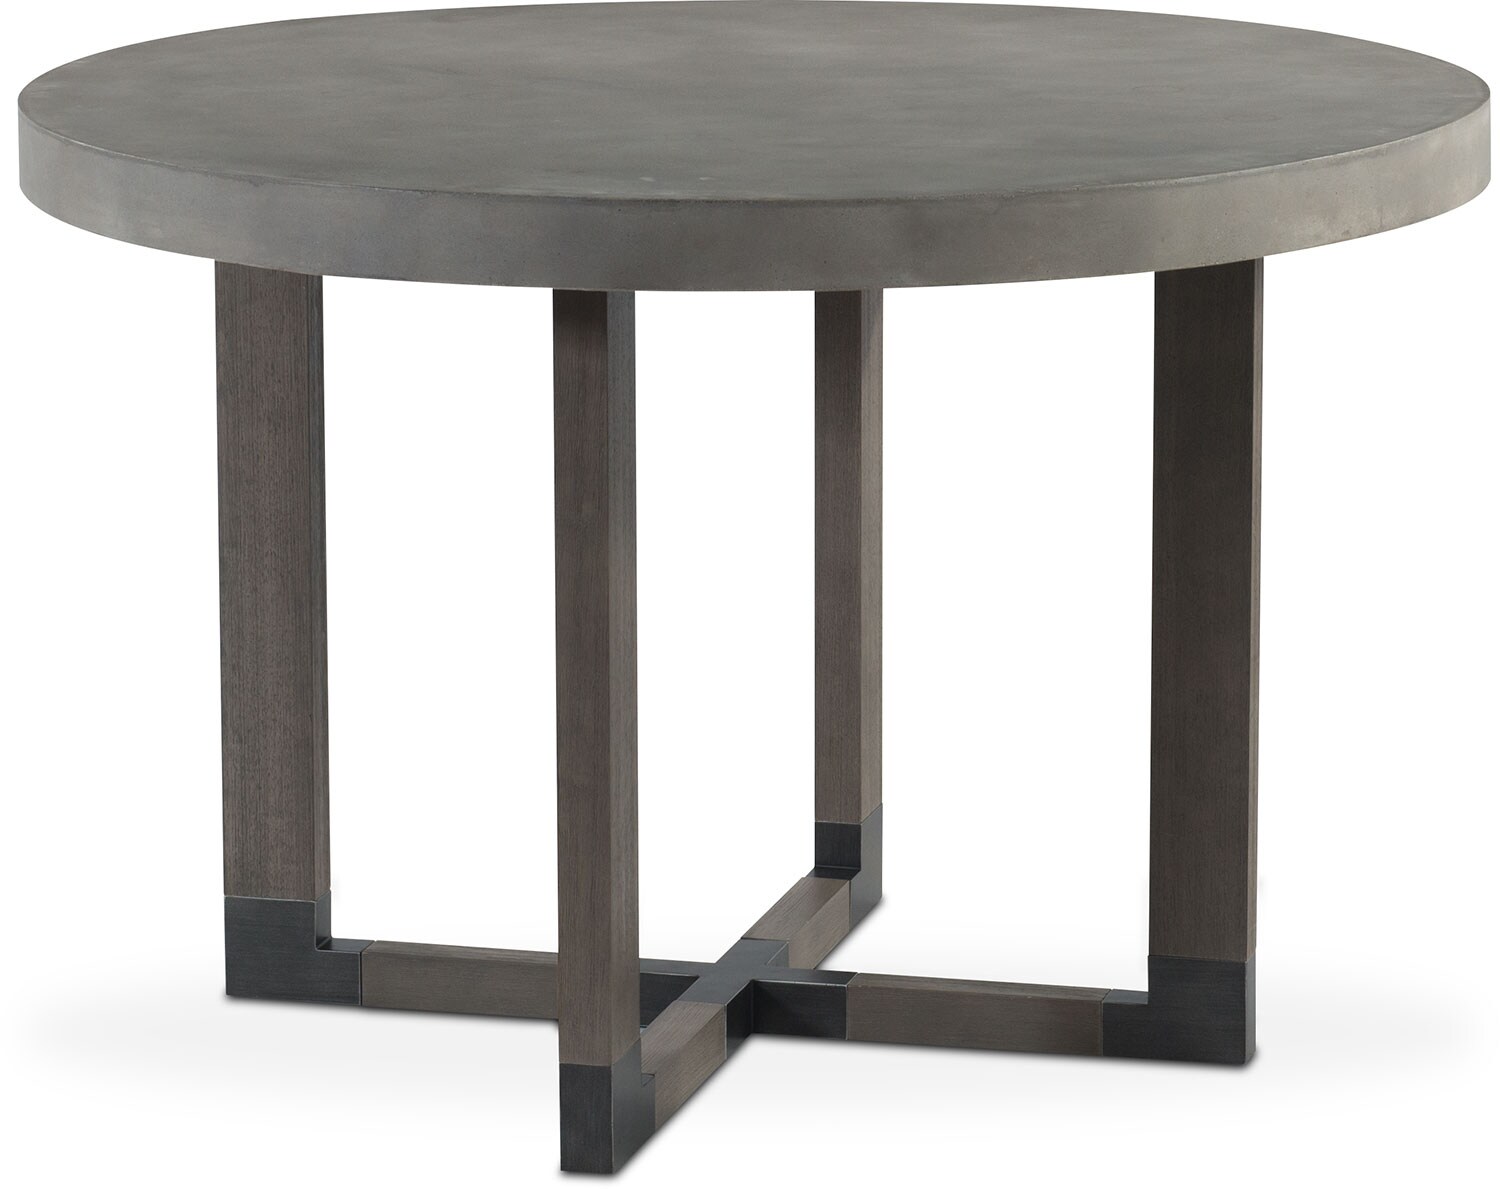 Malibu Round Counter-Height Concrete Top Table - Gray | Value City ...